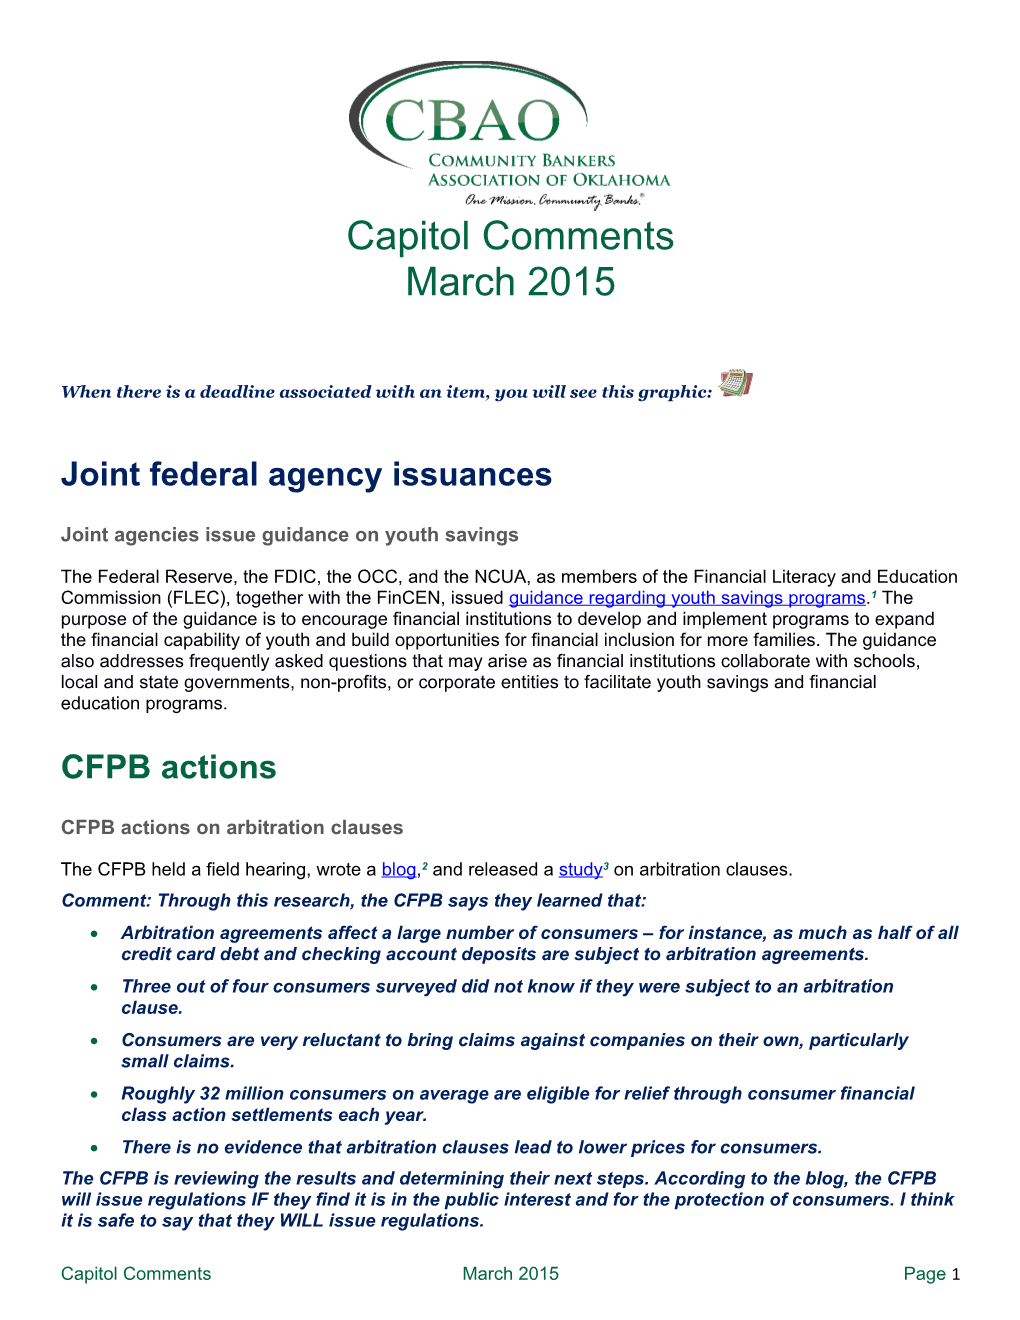 Joint Federal Agency Issuances s1